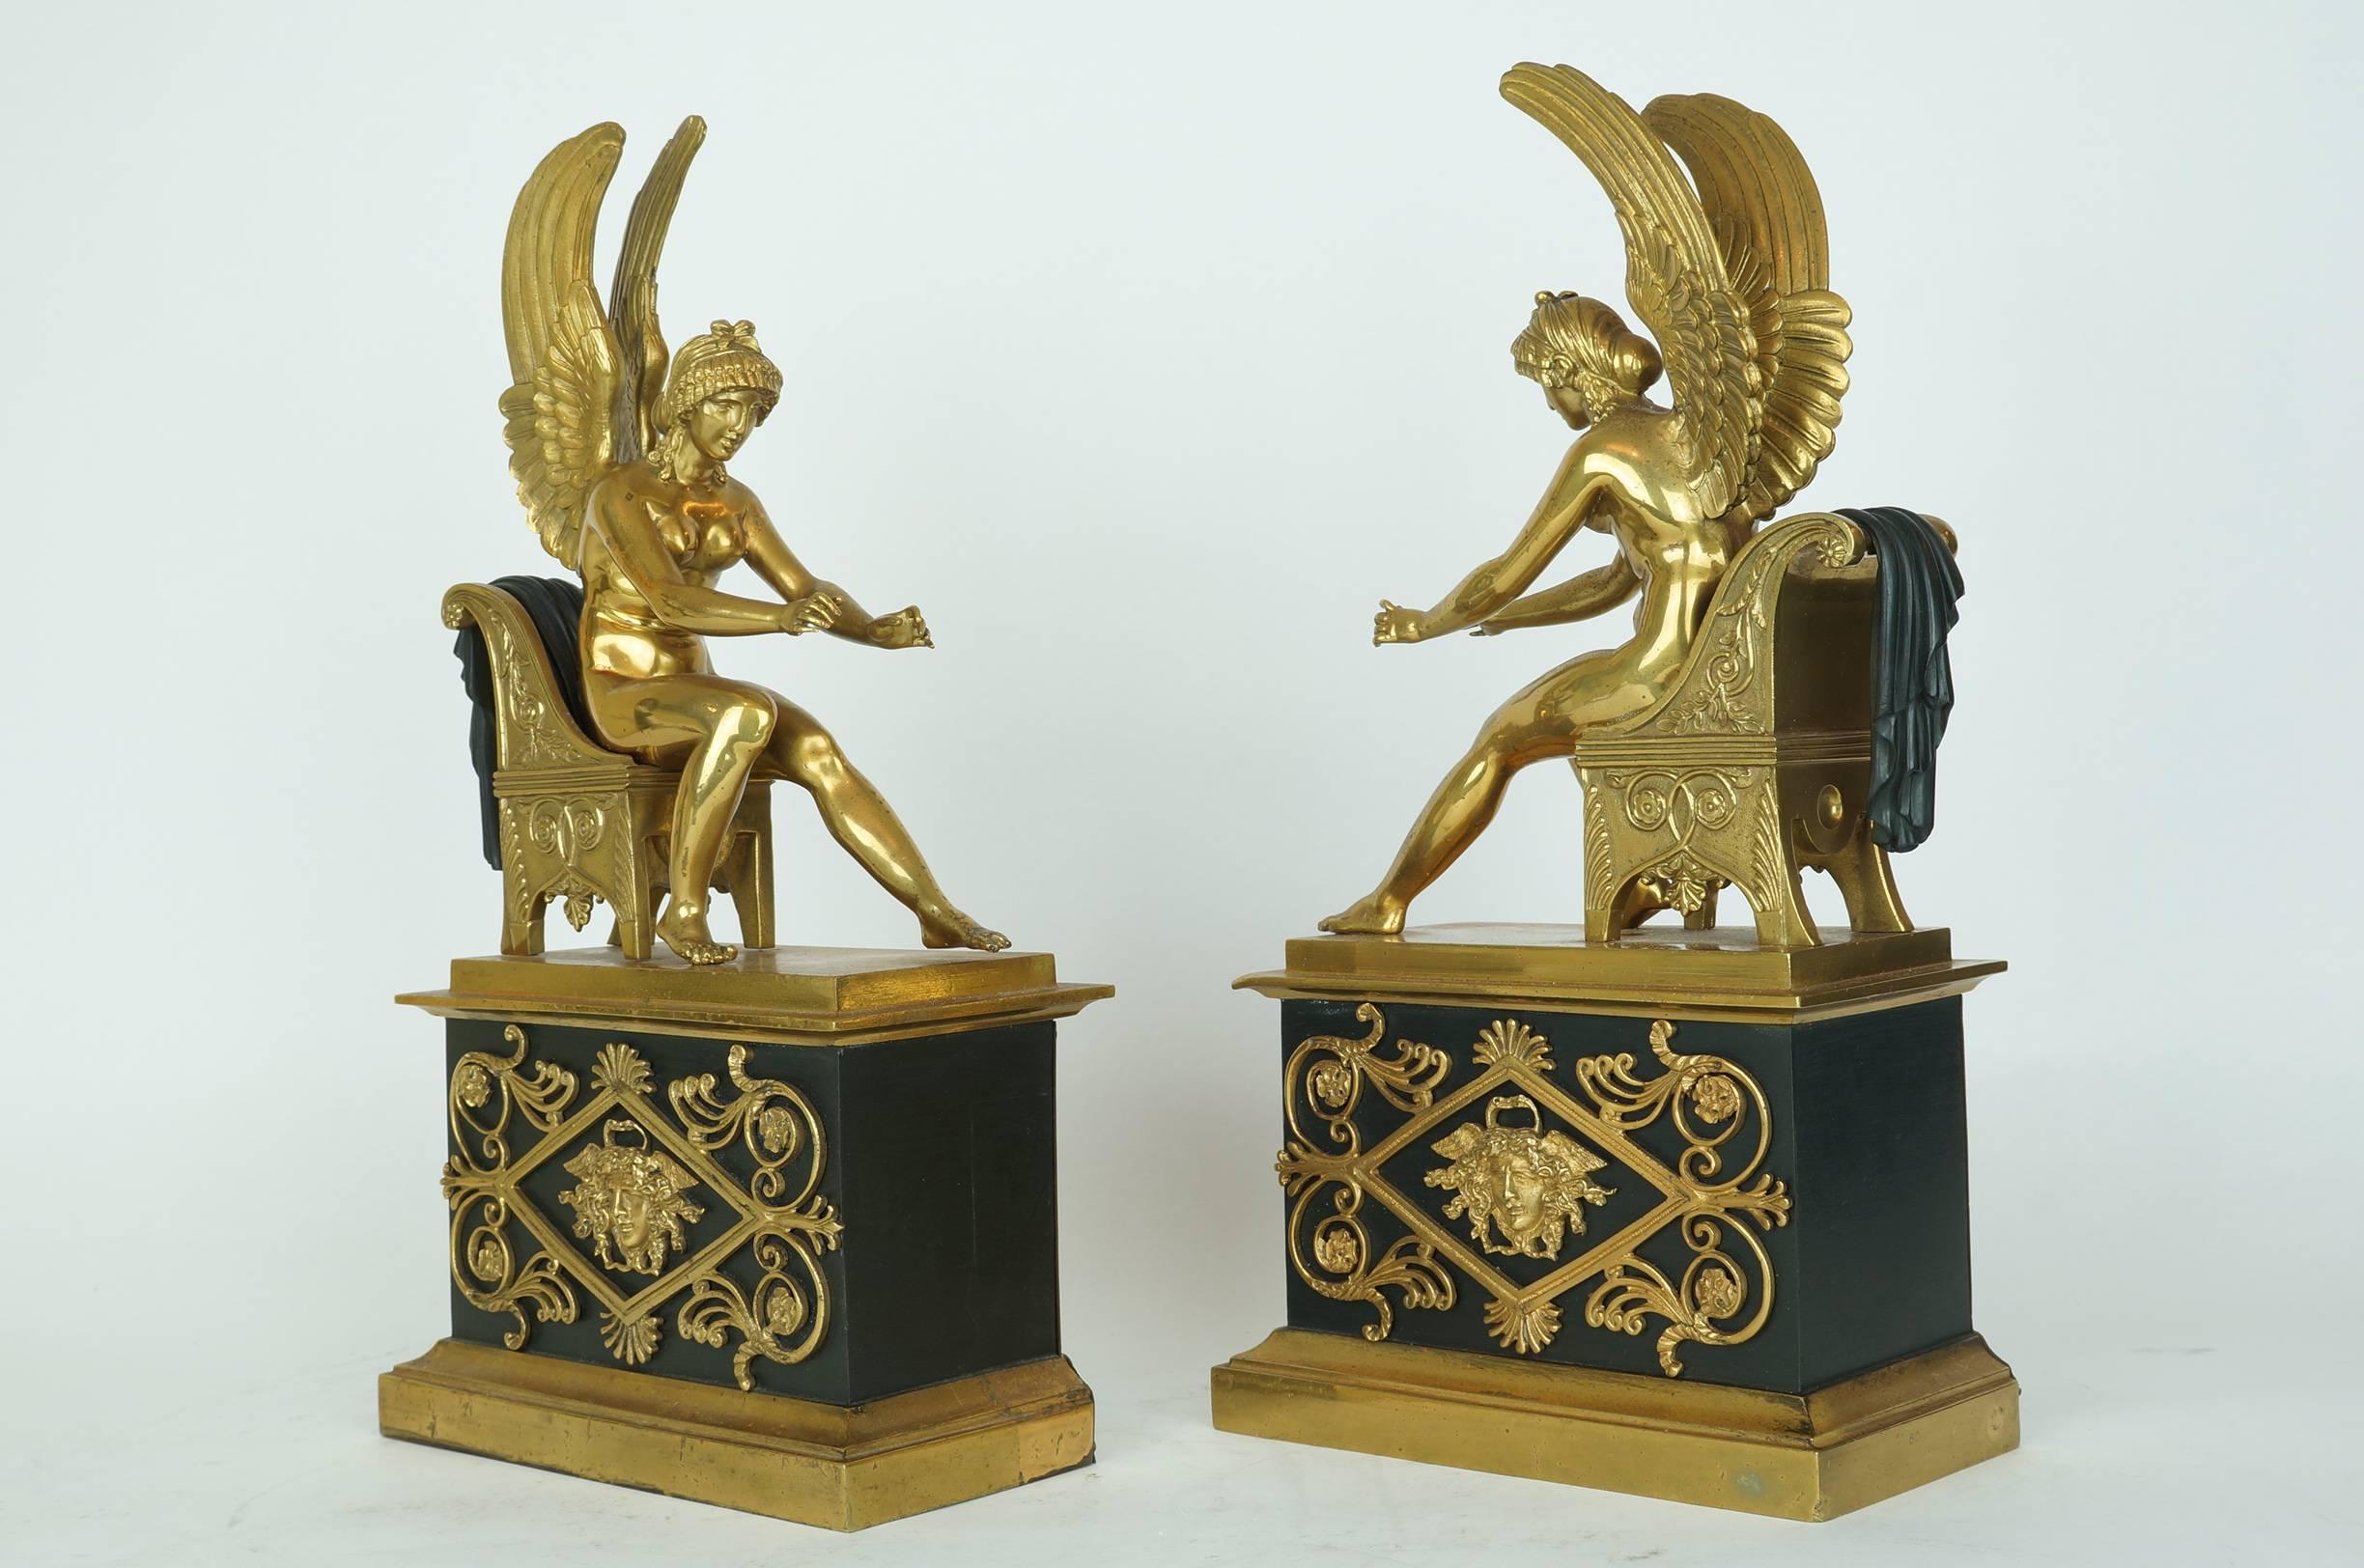 Neoclassical pair of French Empire style gilt bronze and patinated bronze fireplace chenets with seated winged figures on chairs.
Stock Number: MF18